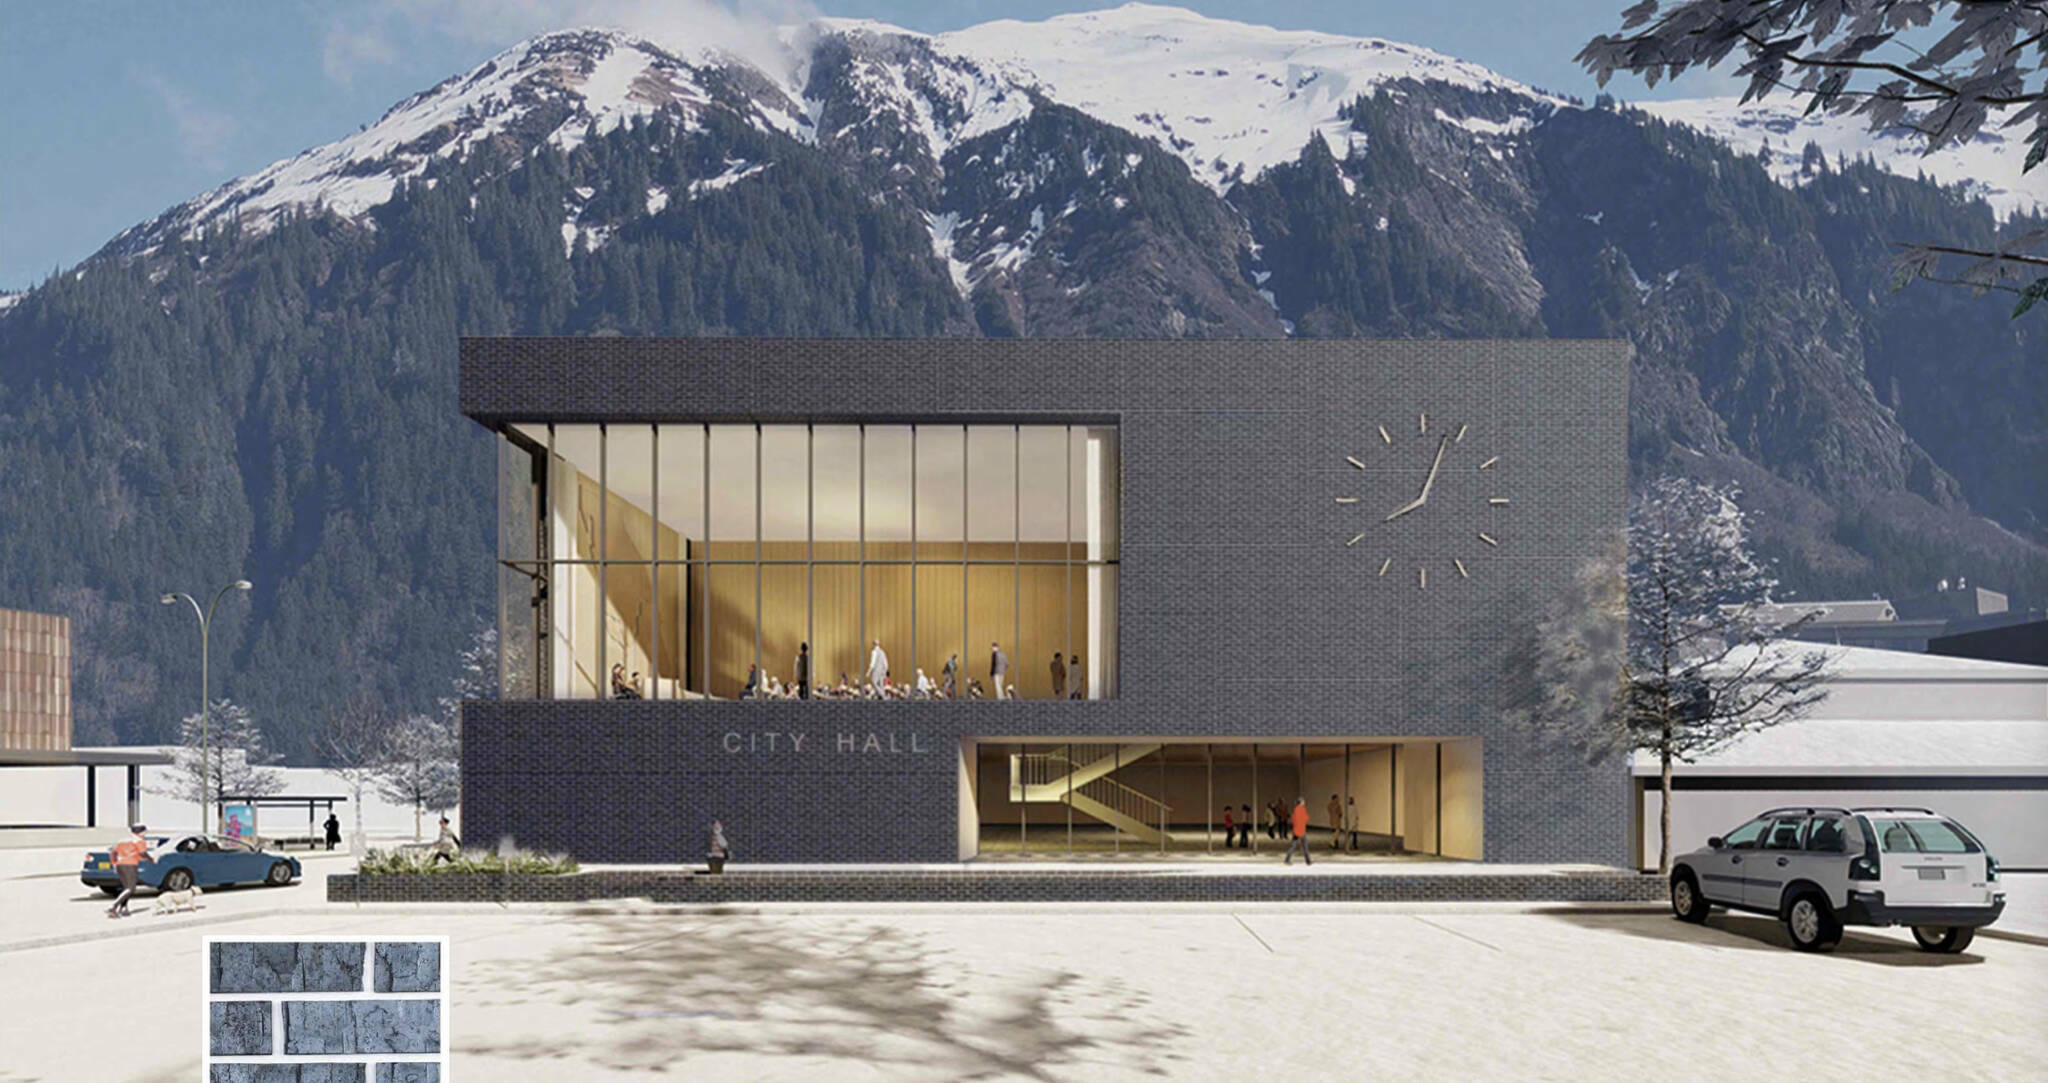 An artist depiction of a new city hall building in Juneau. (Courtesy Image / North Wind Architects)